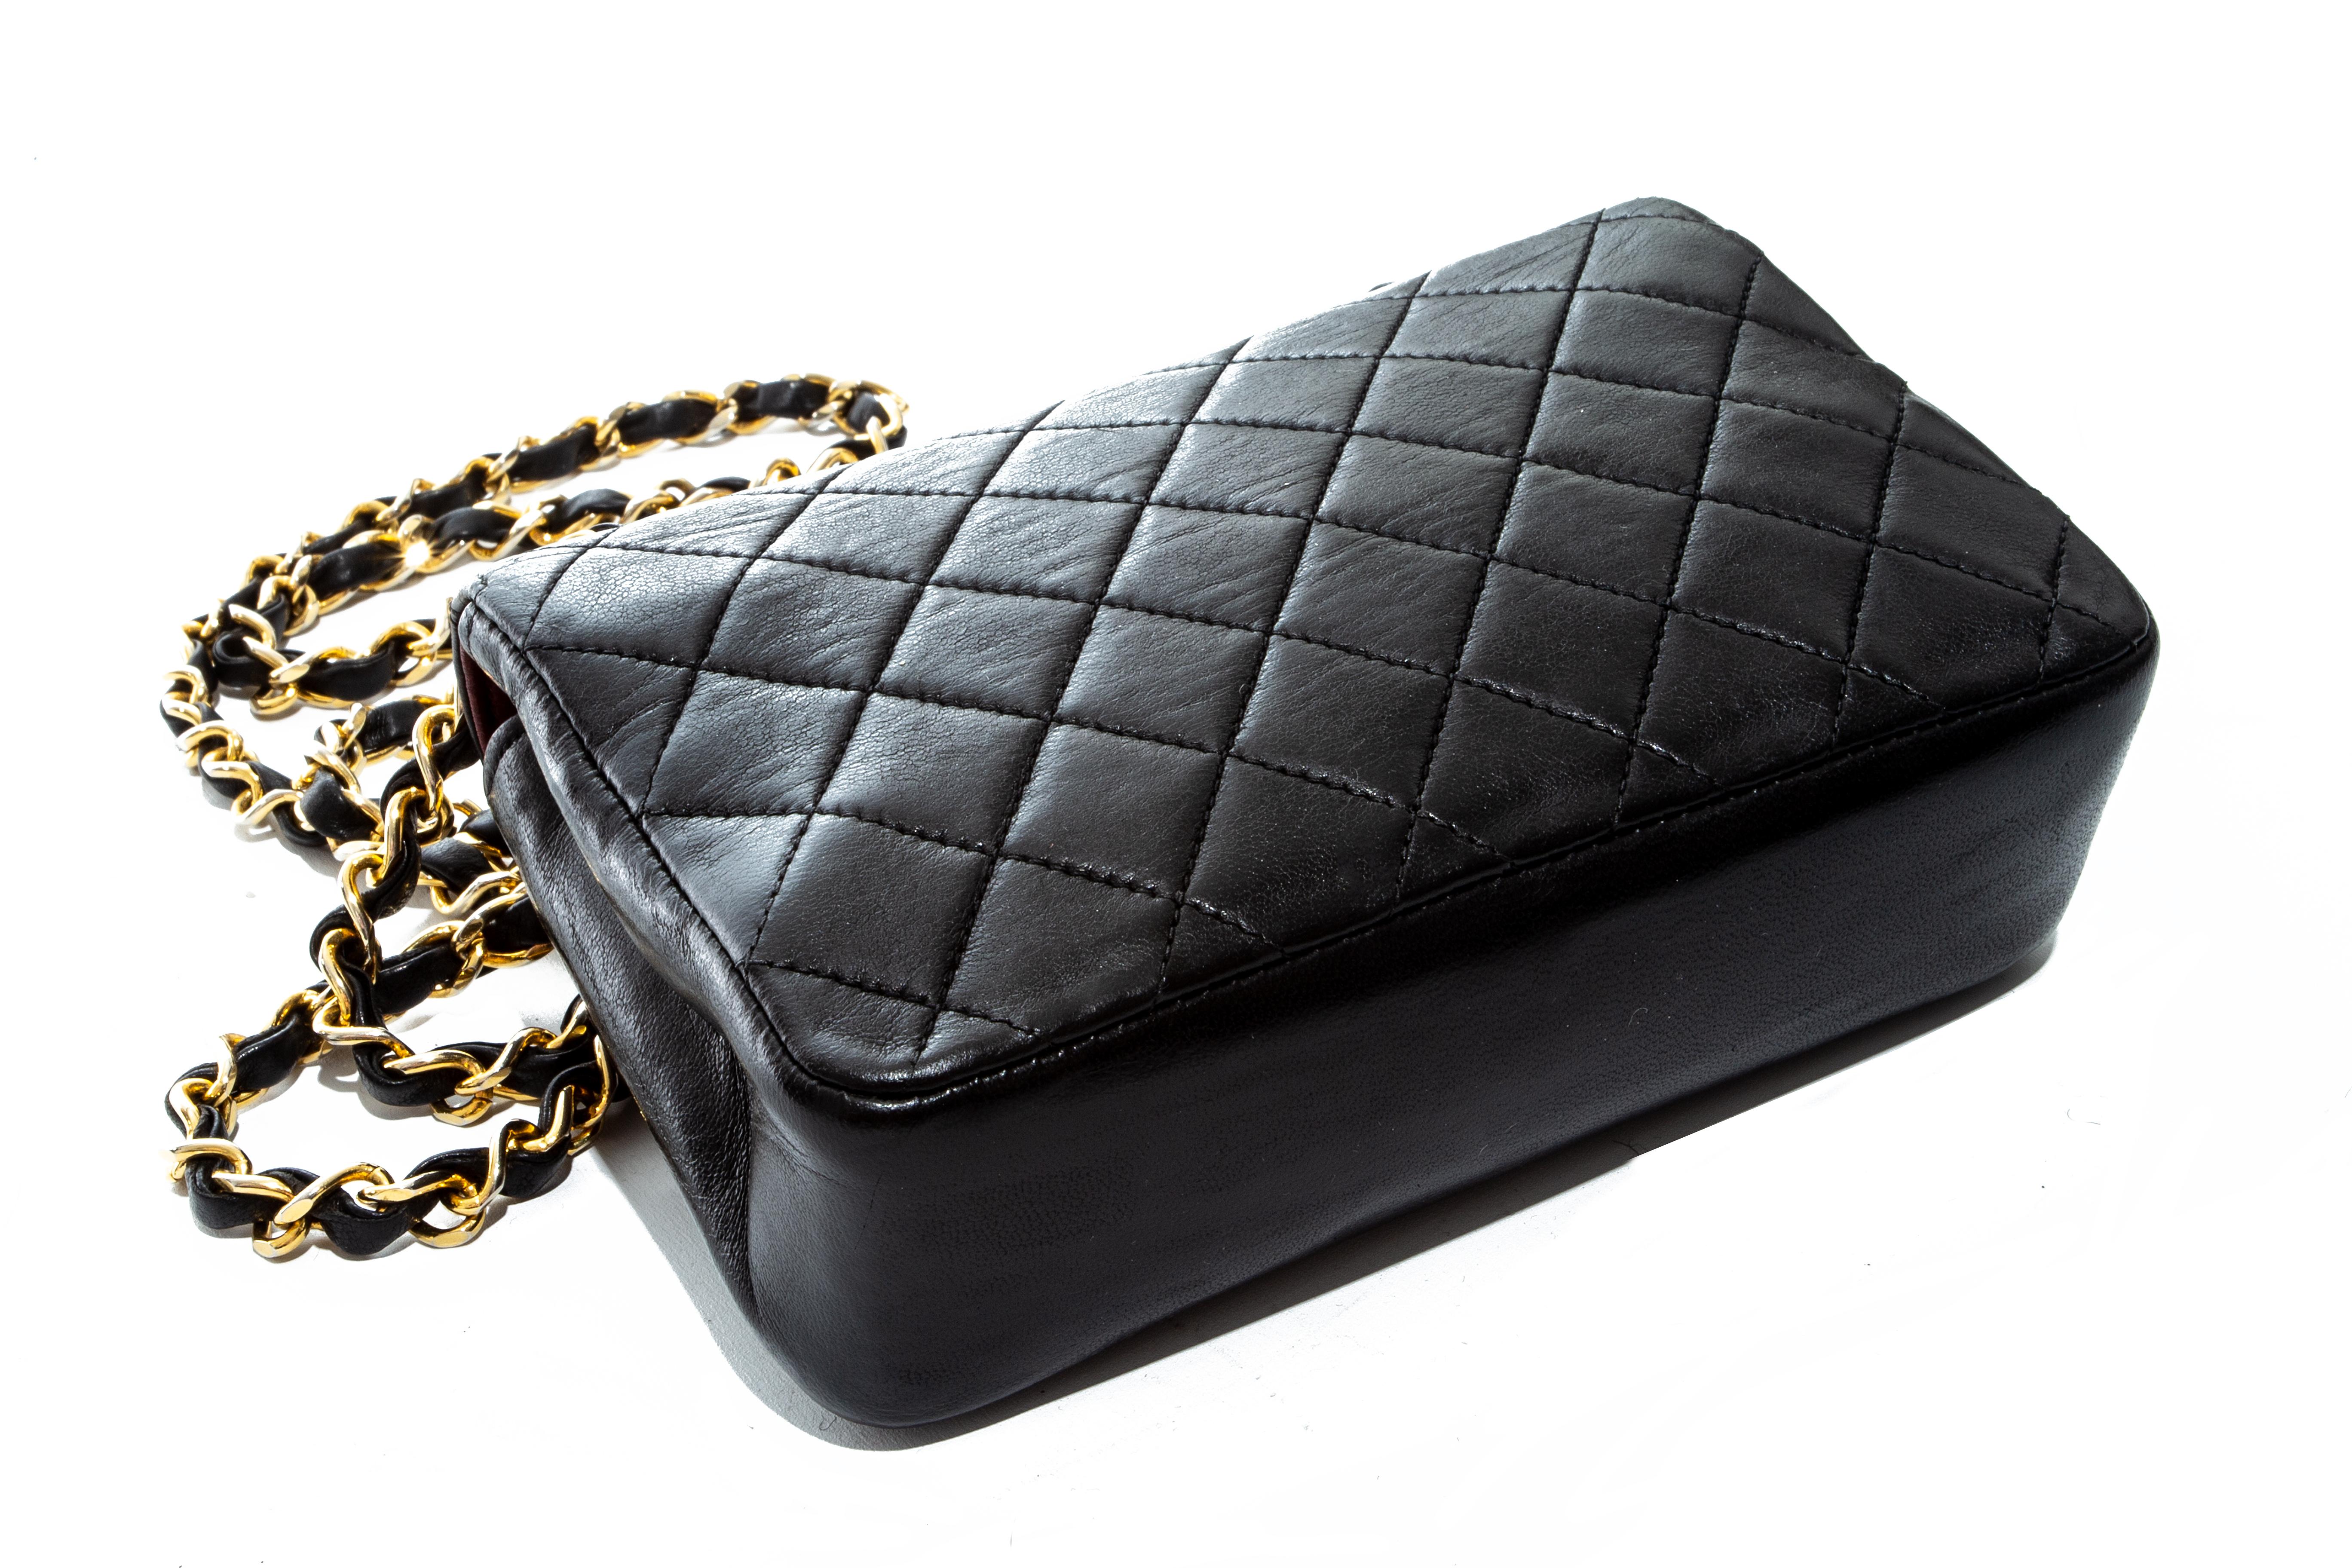 Chanel mini black quilted lambskin leather crossbody flap bag, c. 1986-8 2